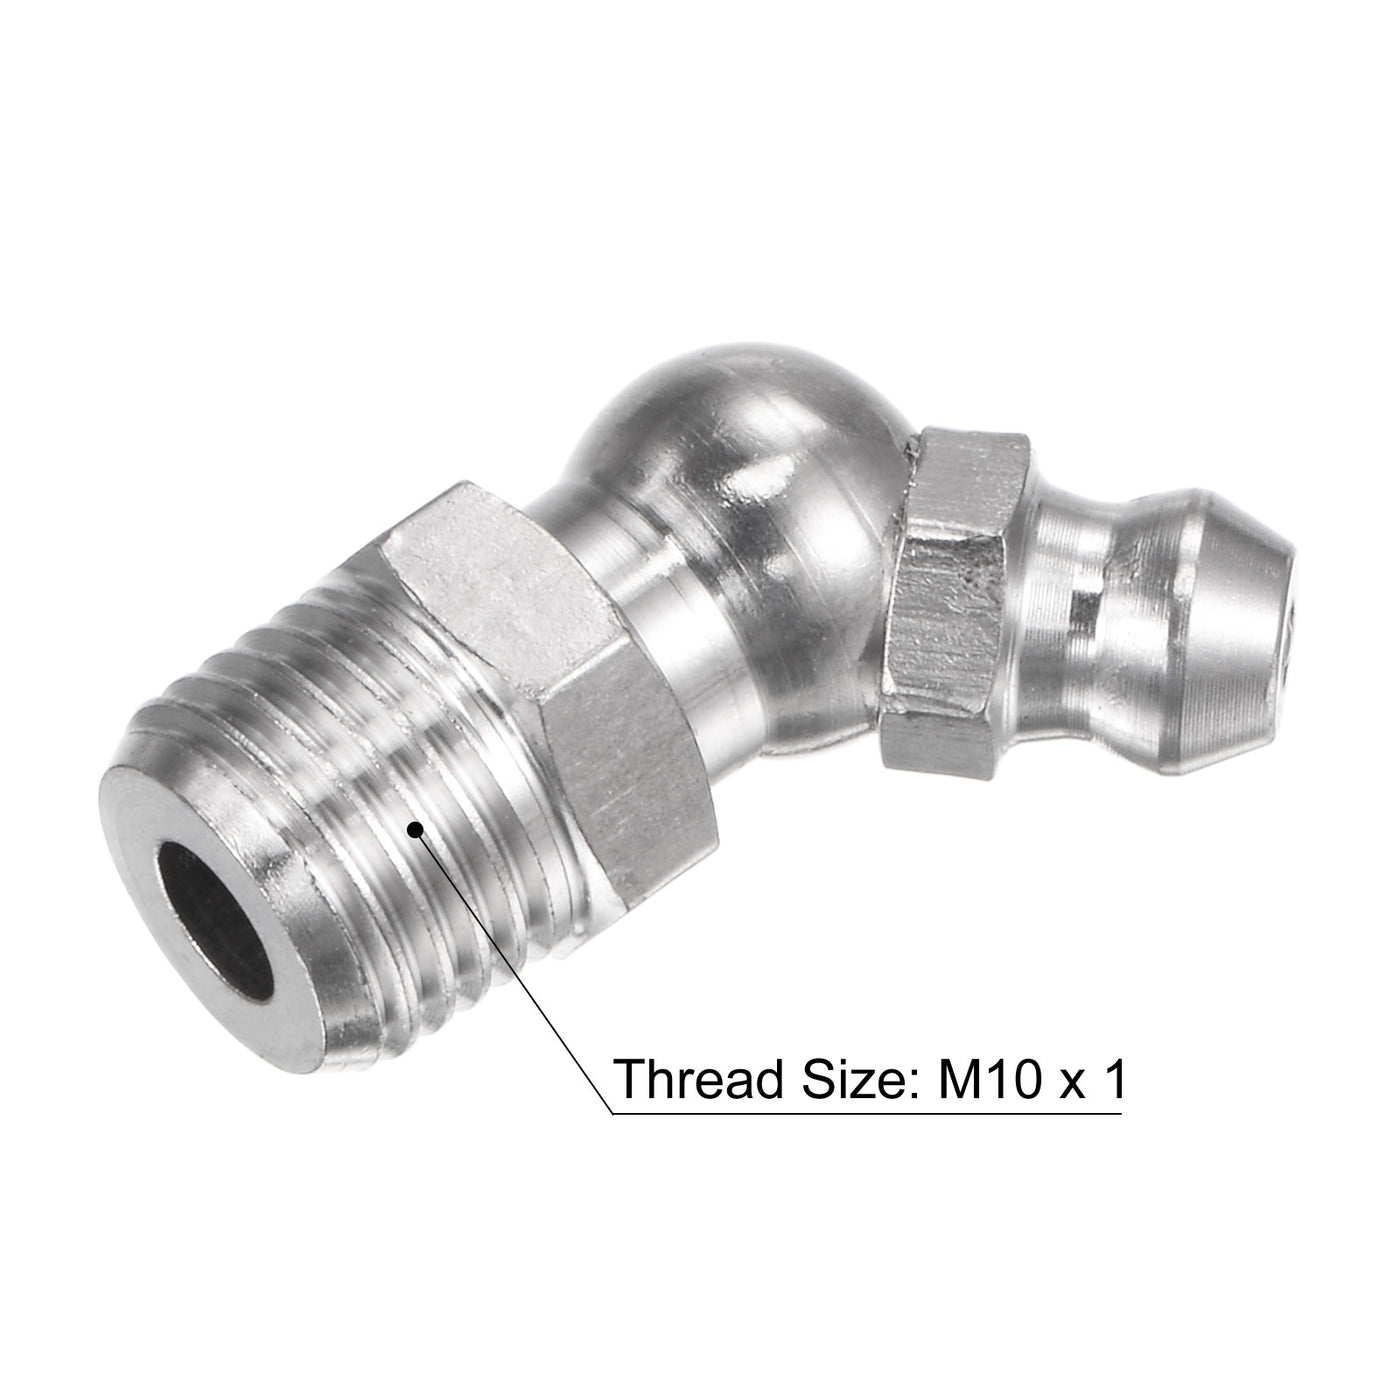 Uxcell Uxcell 201 Stainless Steel 45 Degree Hydraulic Grease Fitting M6 x 1mm Thread, 2Pcs